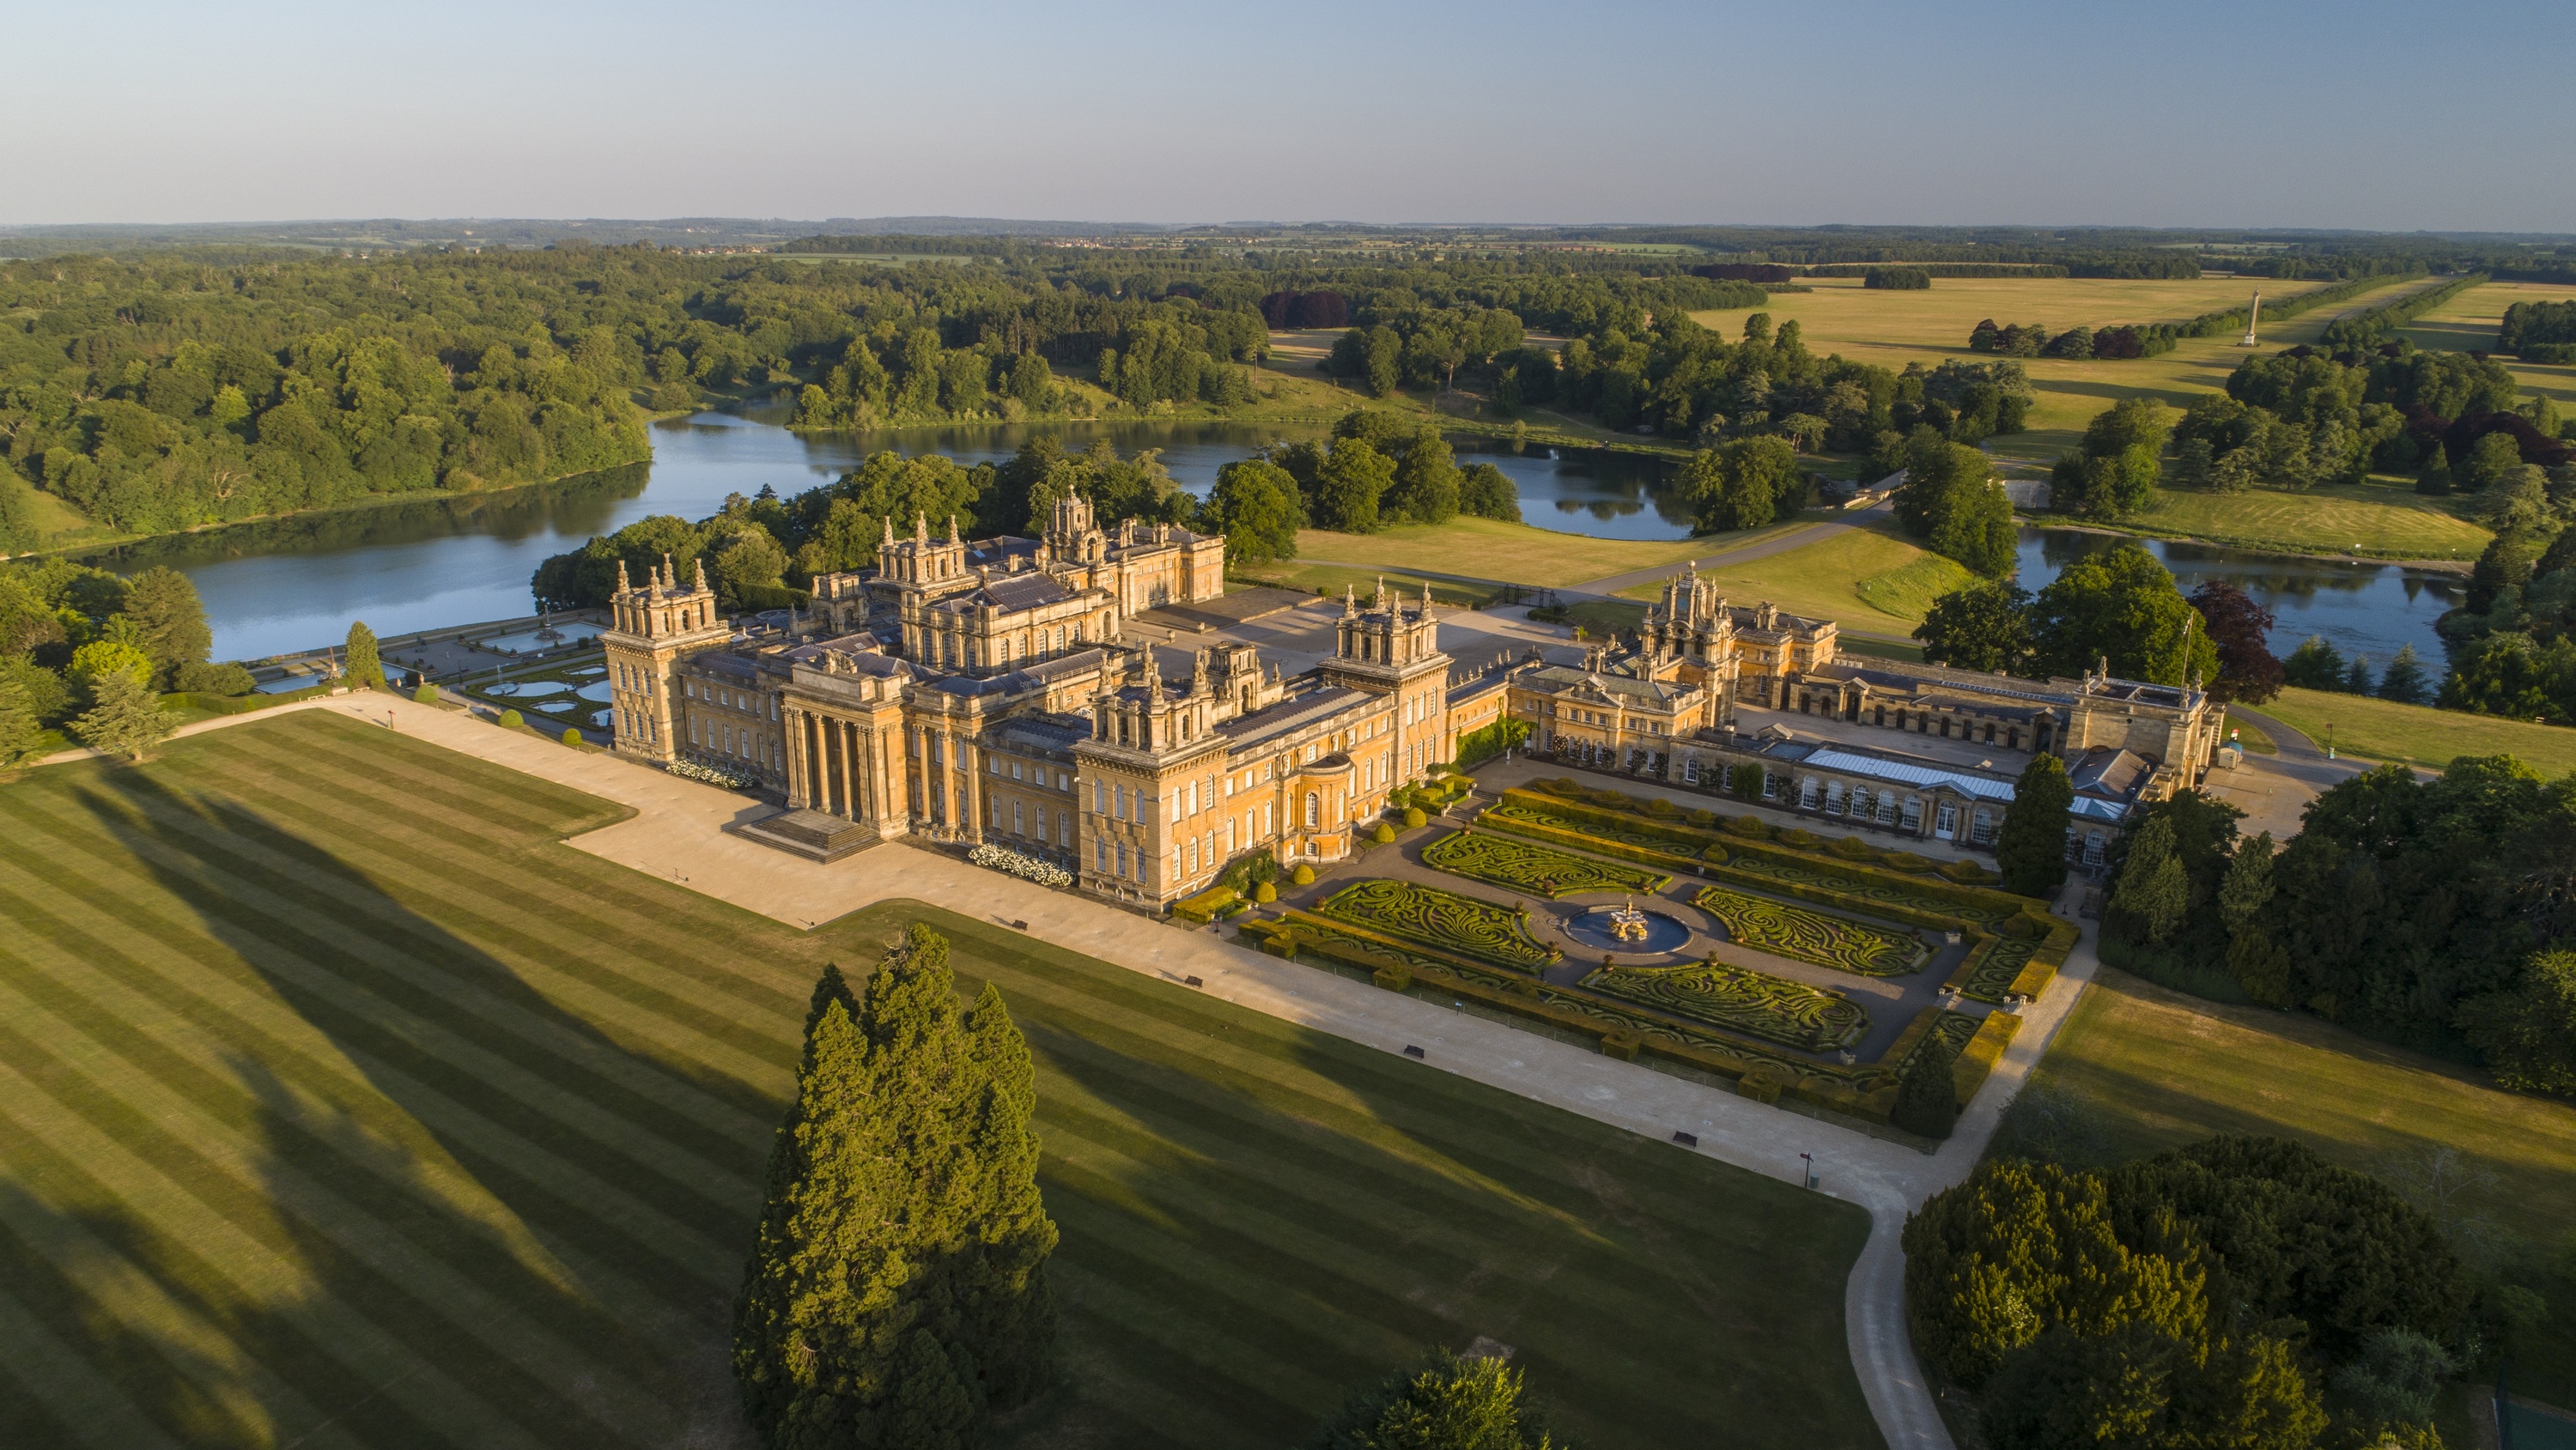 Blenheim Palace | Attractions in Oxfordshire, London